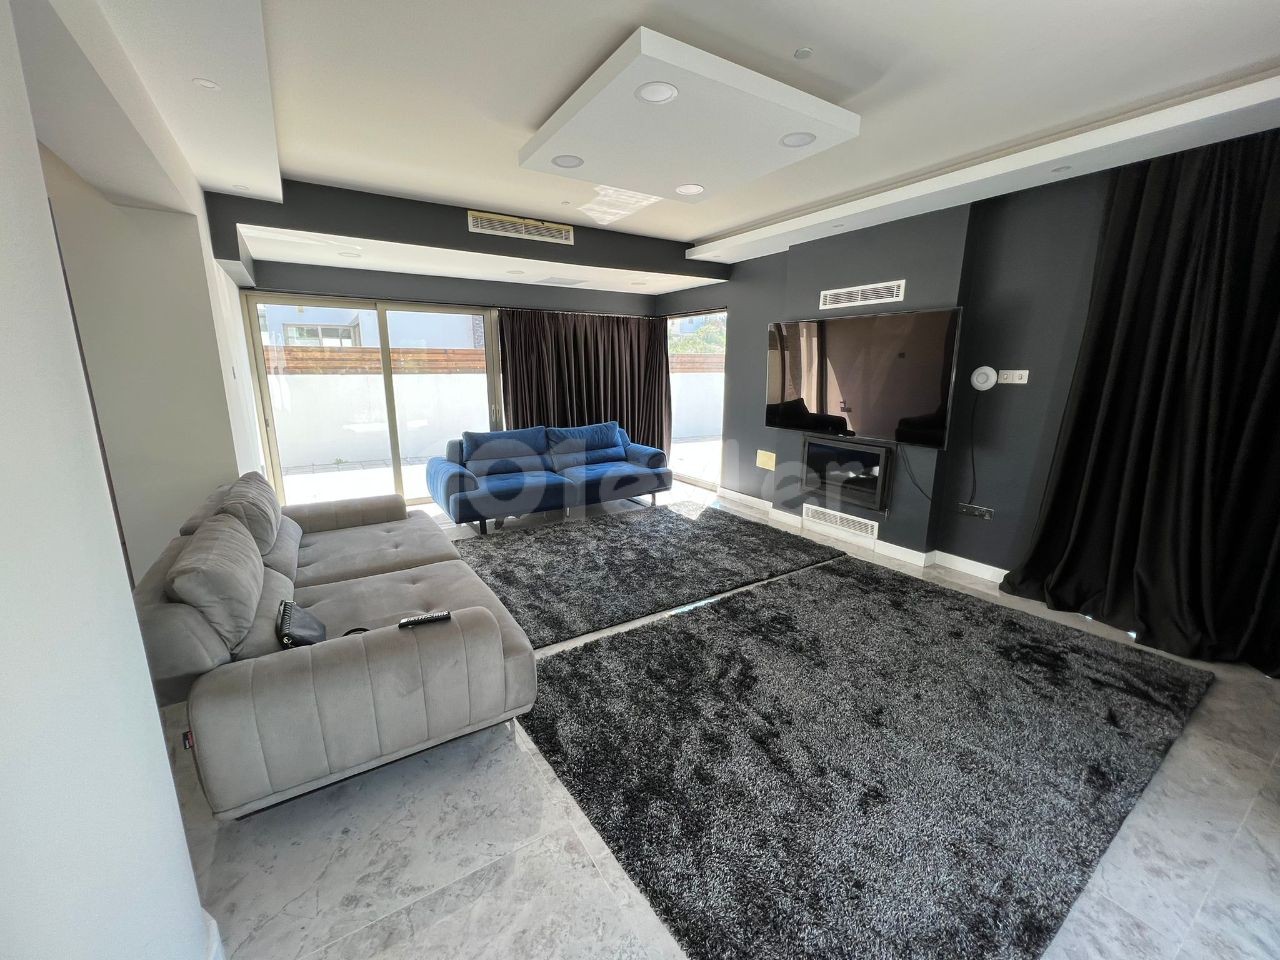 3 BEDROOM LUXURIOUS VILLA FOR RENT IN ÇATALKÖY BY THE SEA !!!